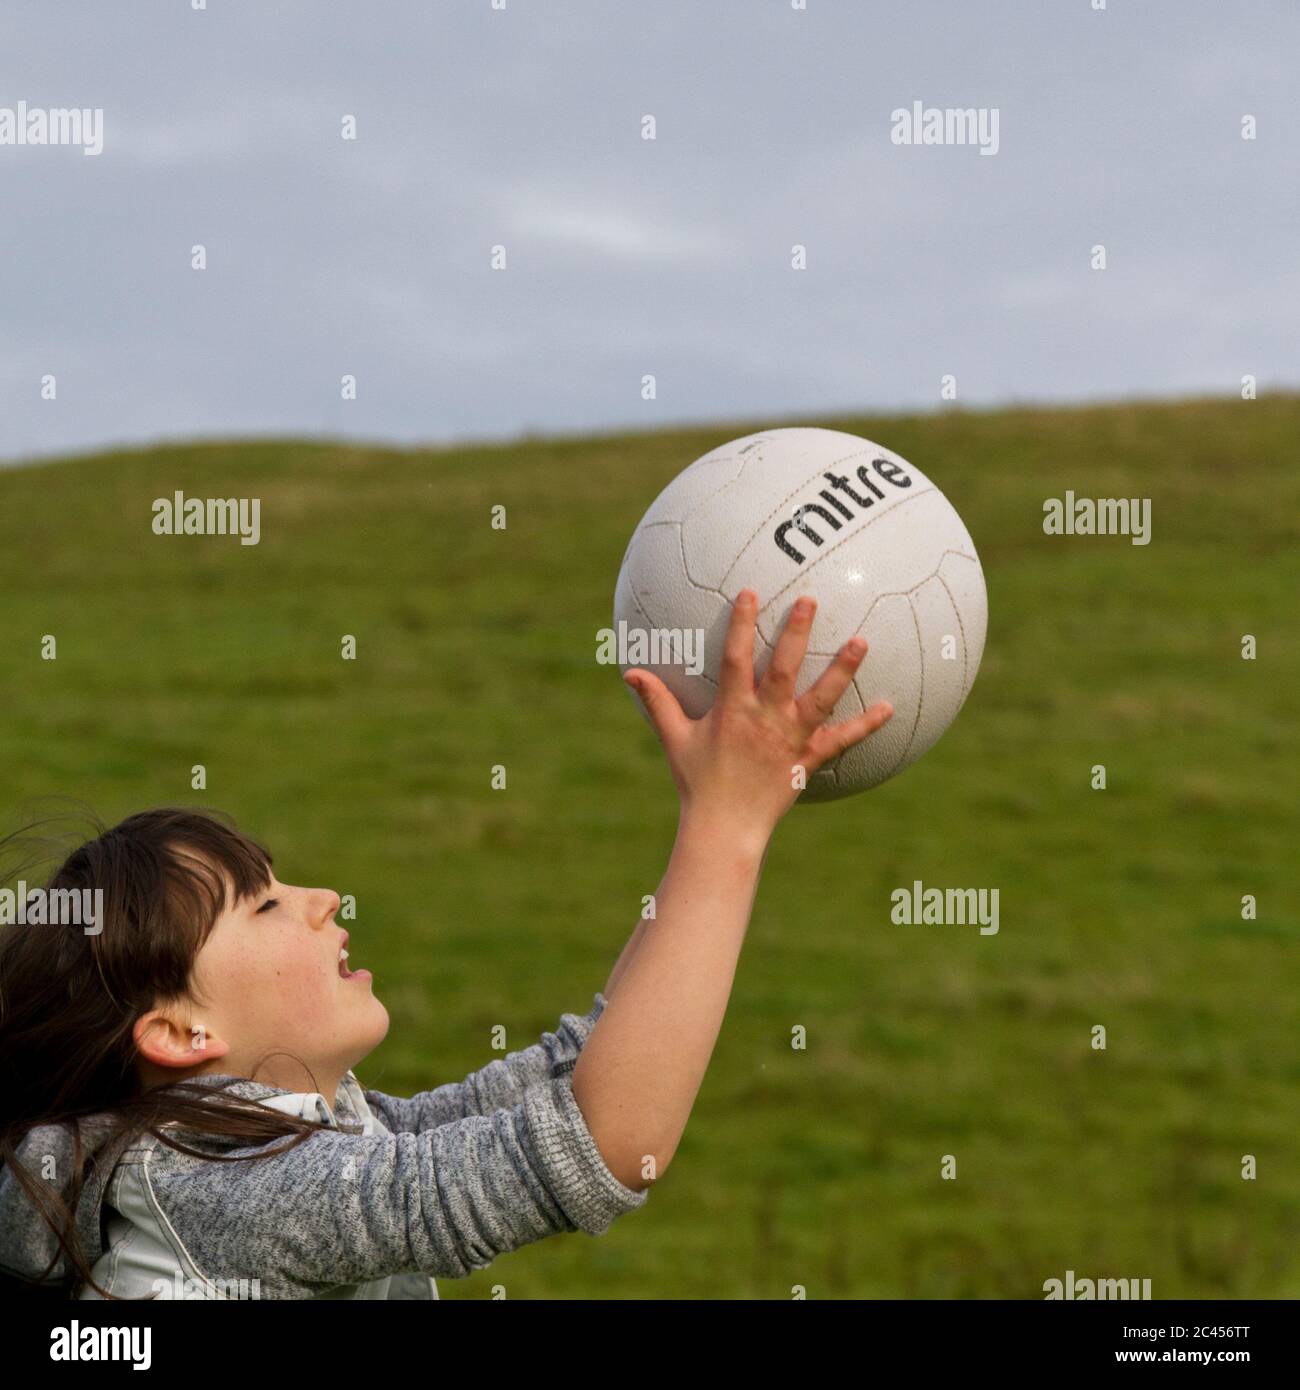 Young girl catching a ball Stock Photo